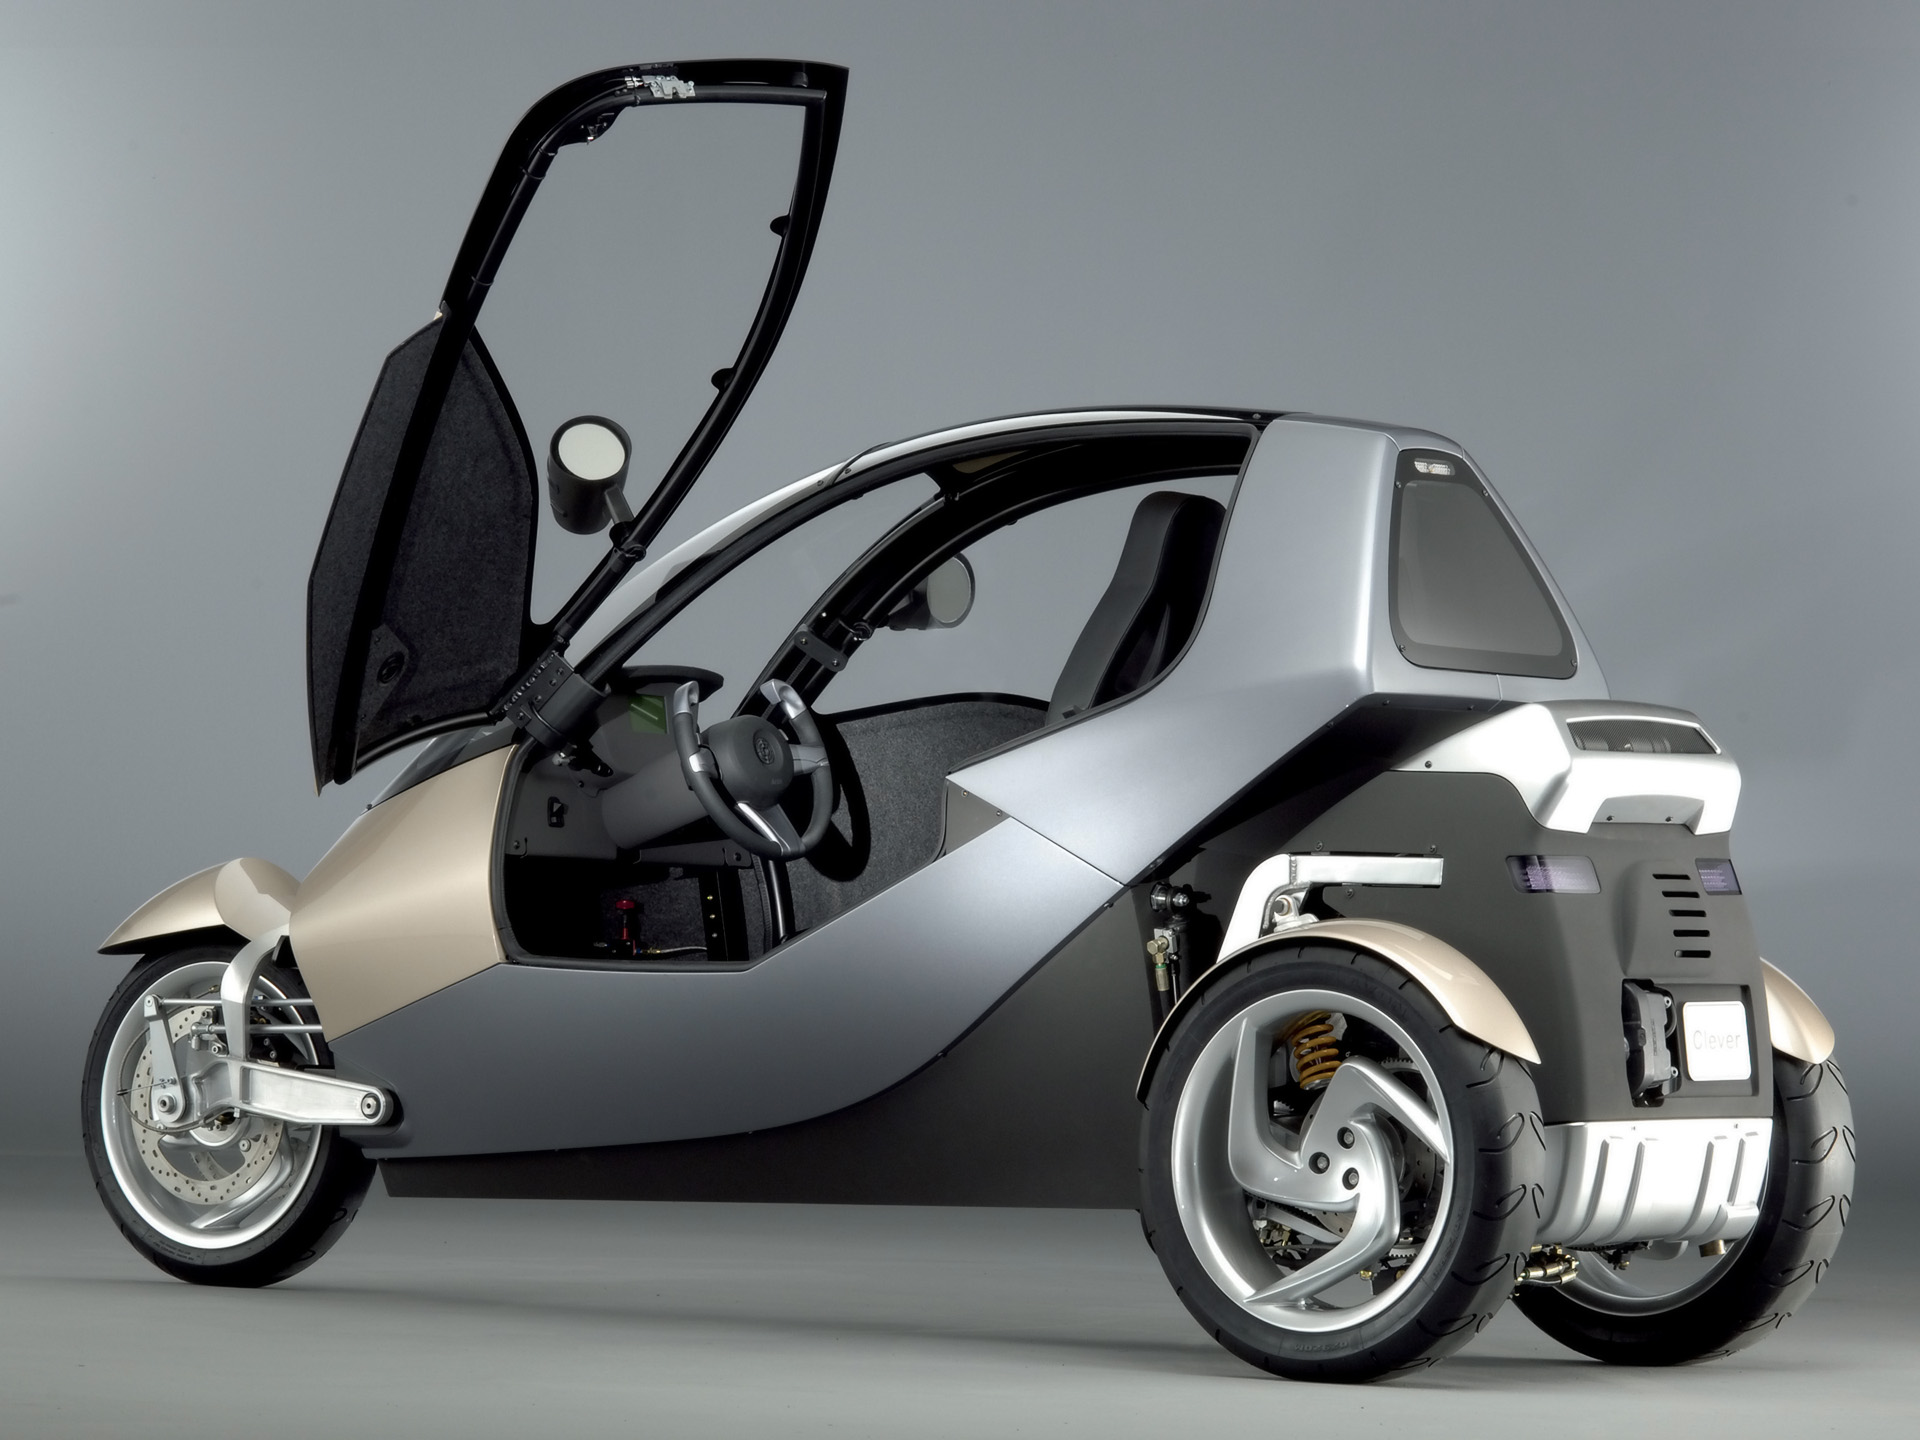 2006, Clever, Research, Vehicle, Concept, Bike, Motorcycle Wallpaper